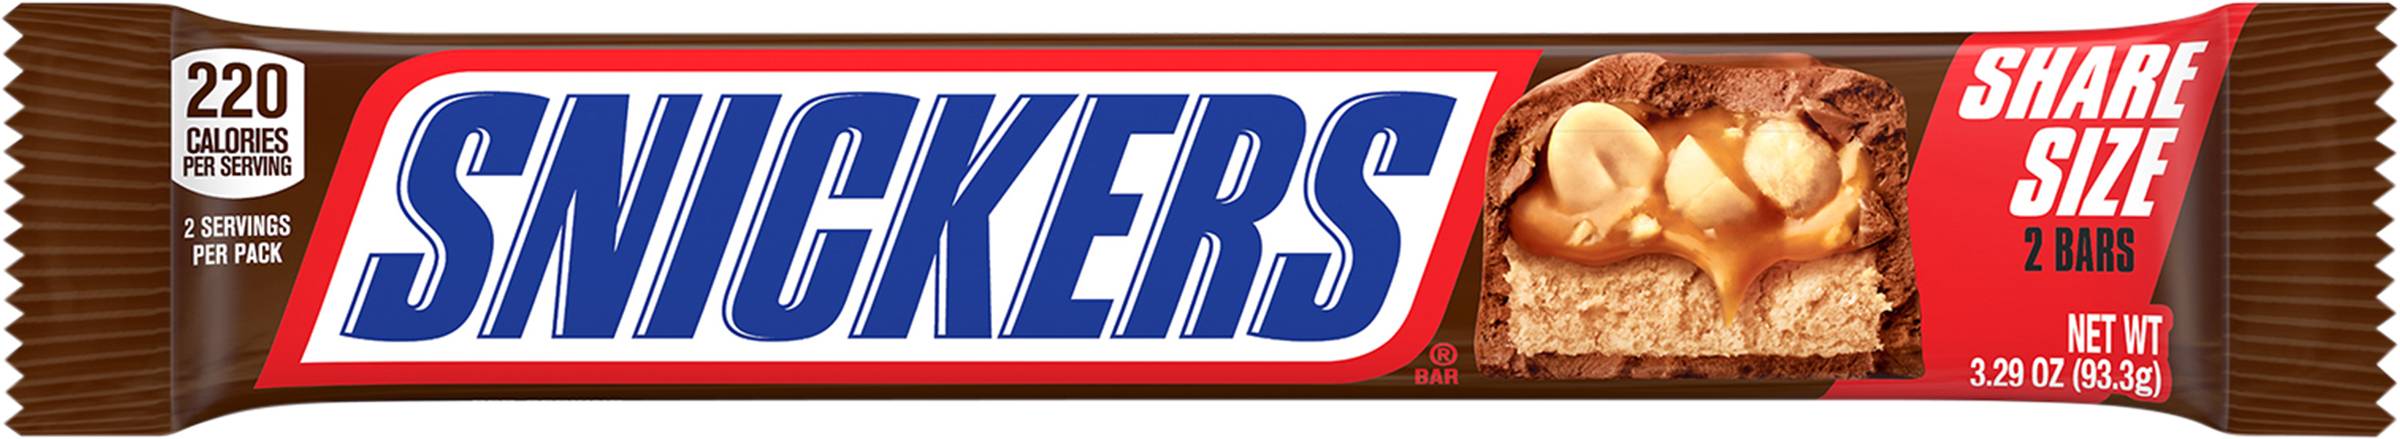 Snickers Sharing Size Bars (2 ct)(milk chocolate-peanuts-caramel-nougat)